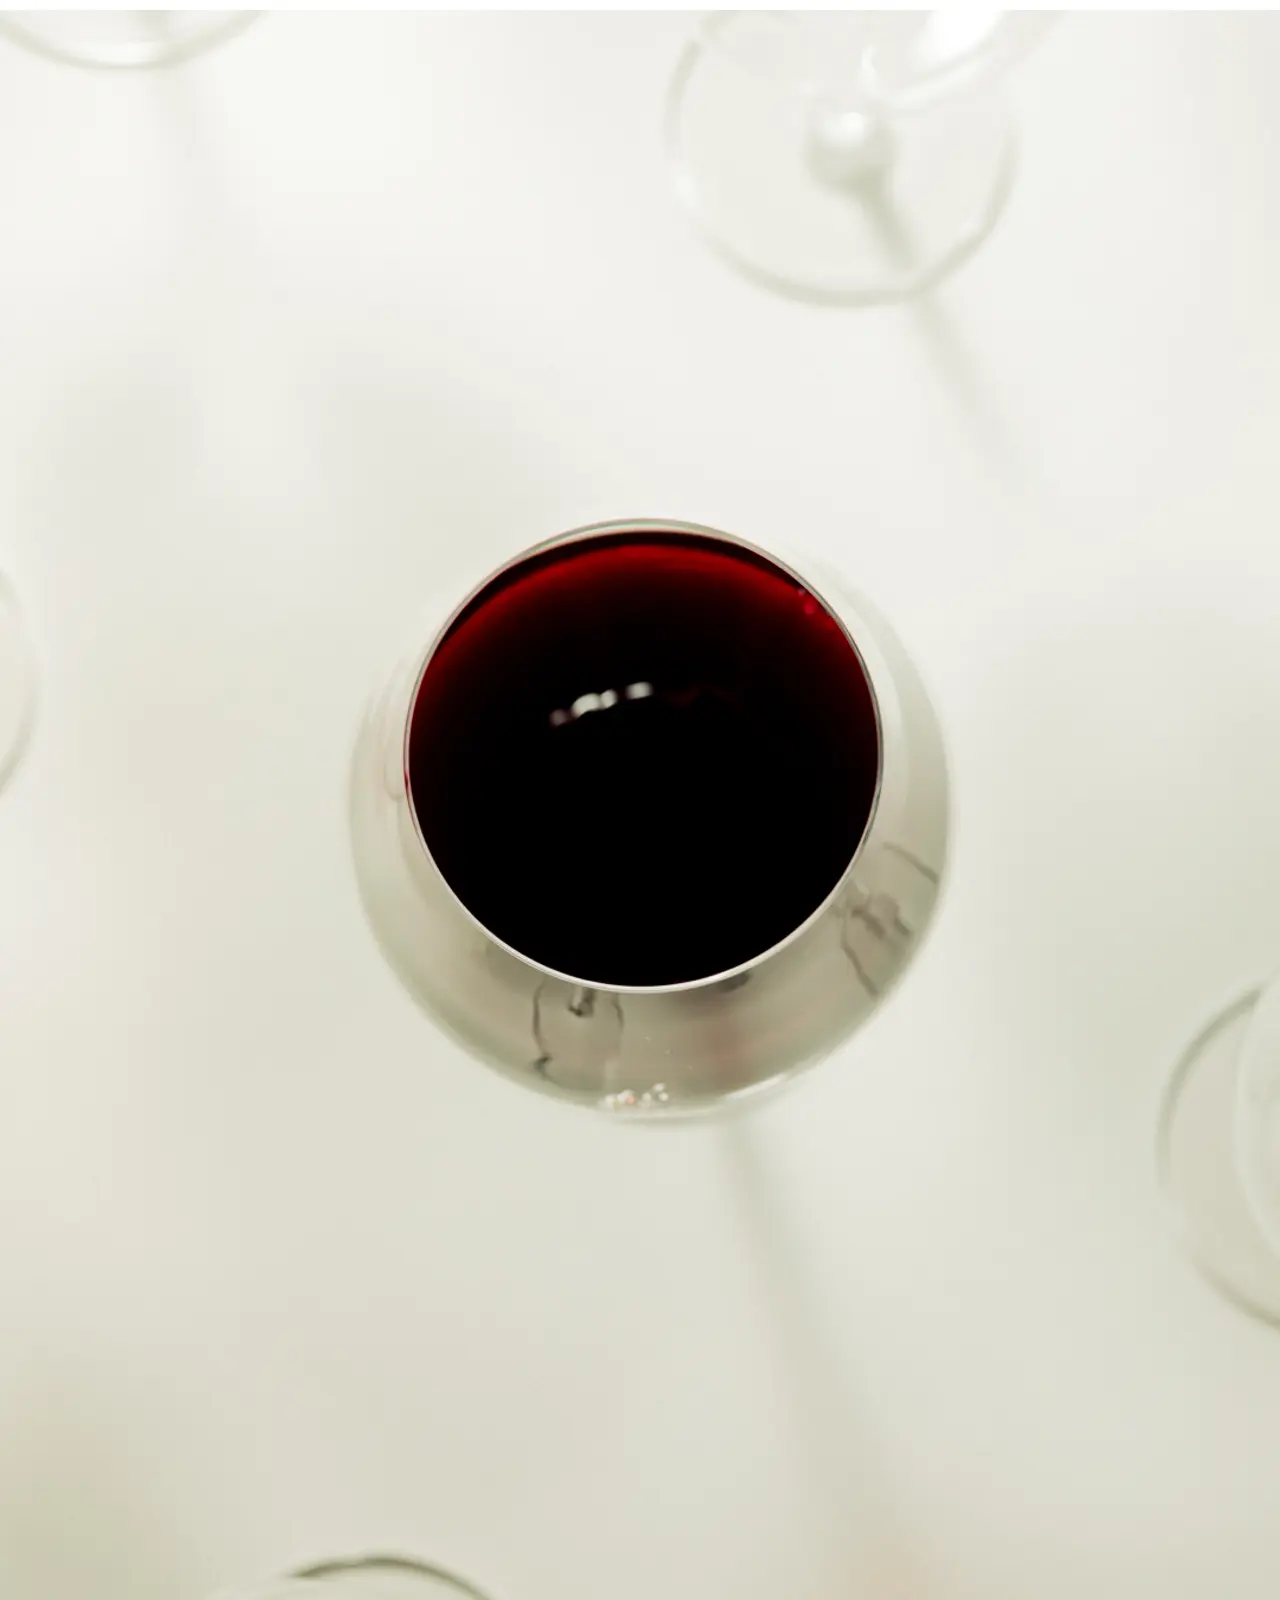 A glass of red wine is viewed from above, with the edges of other stemware glasses visible in the background.